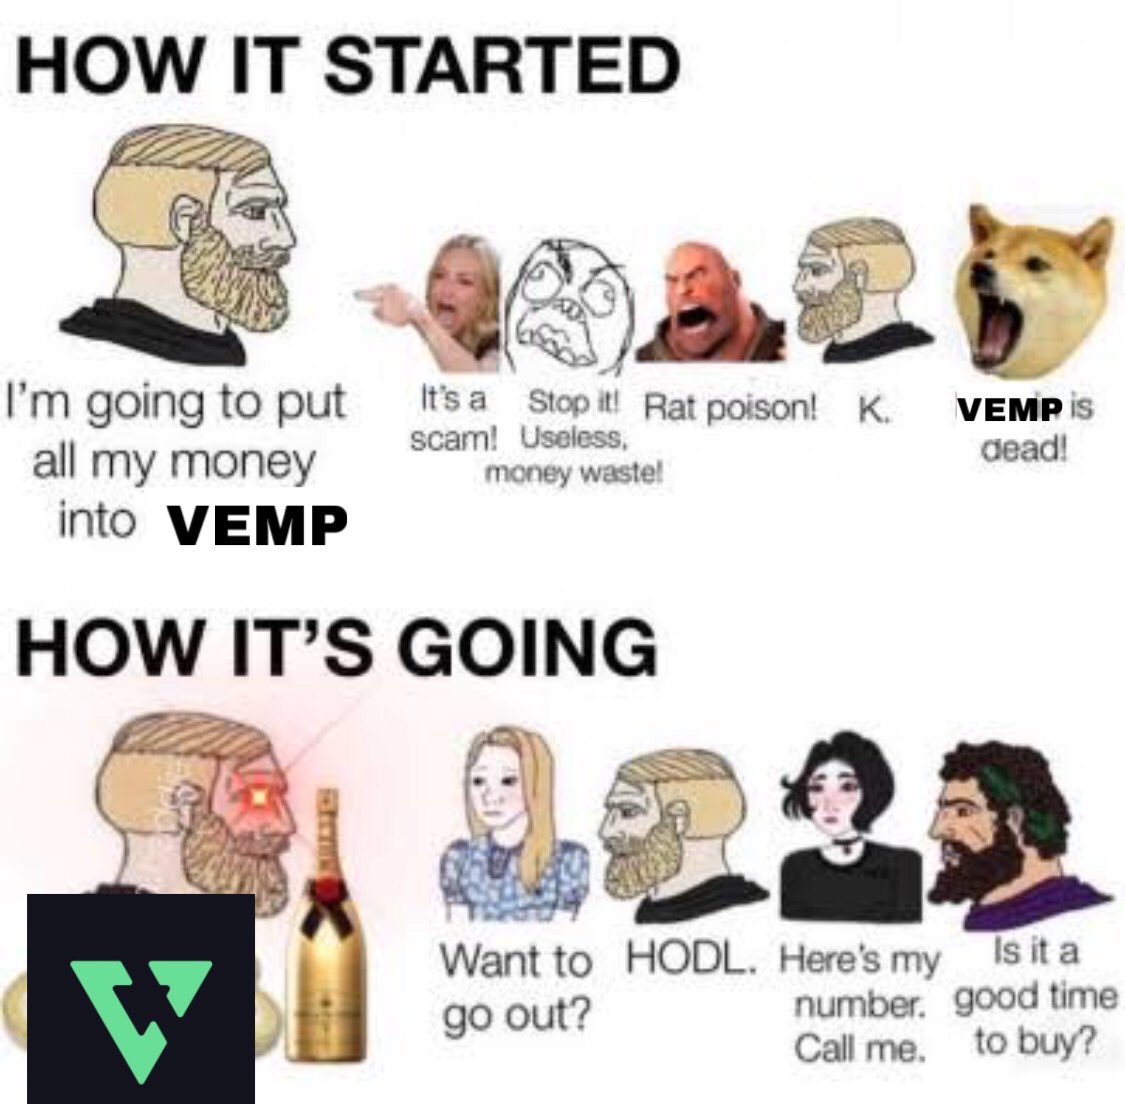 Hodl $VEMP to make your future shine brighter🎉🚀